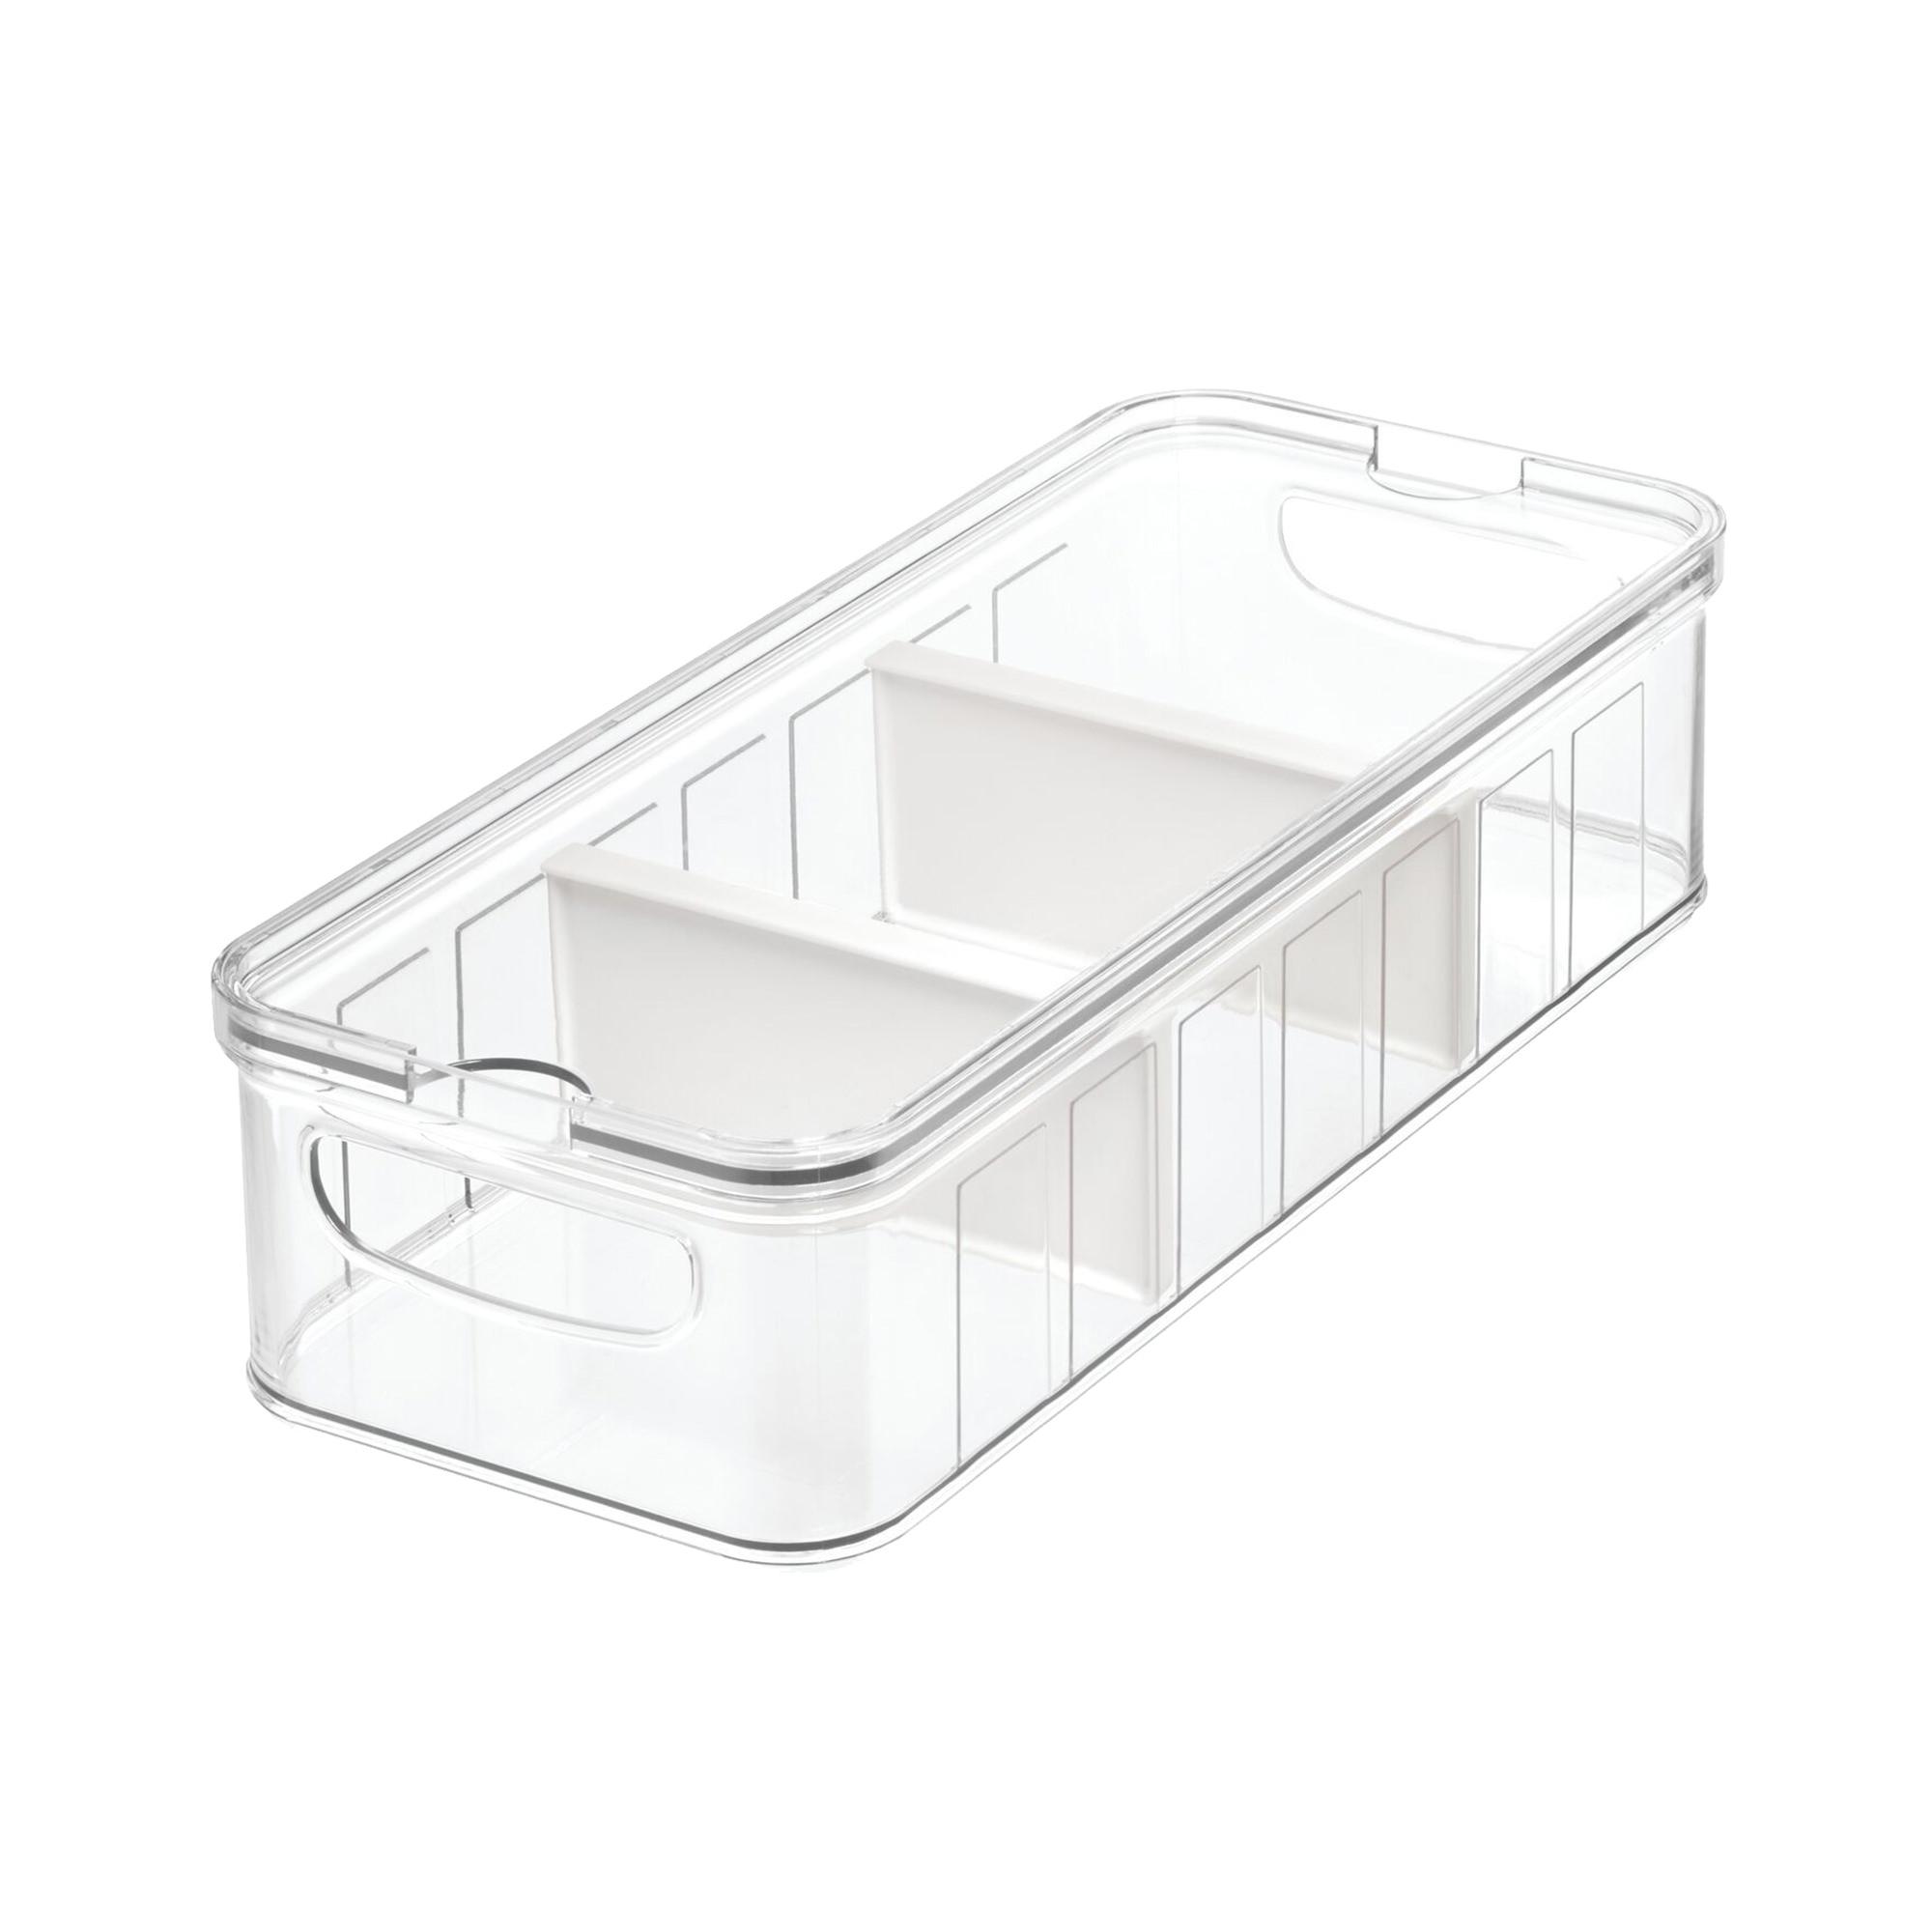 iDesign Crisp Large Bin with Dividers Clear Image 3